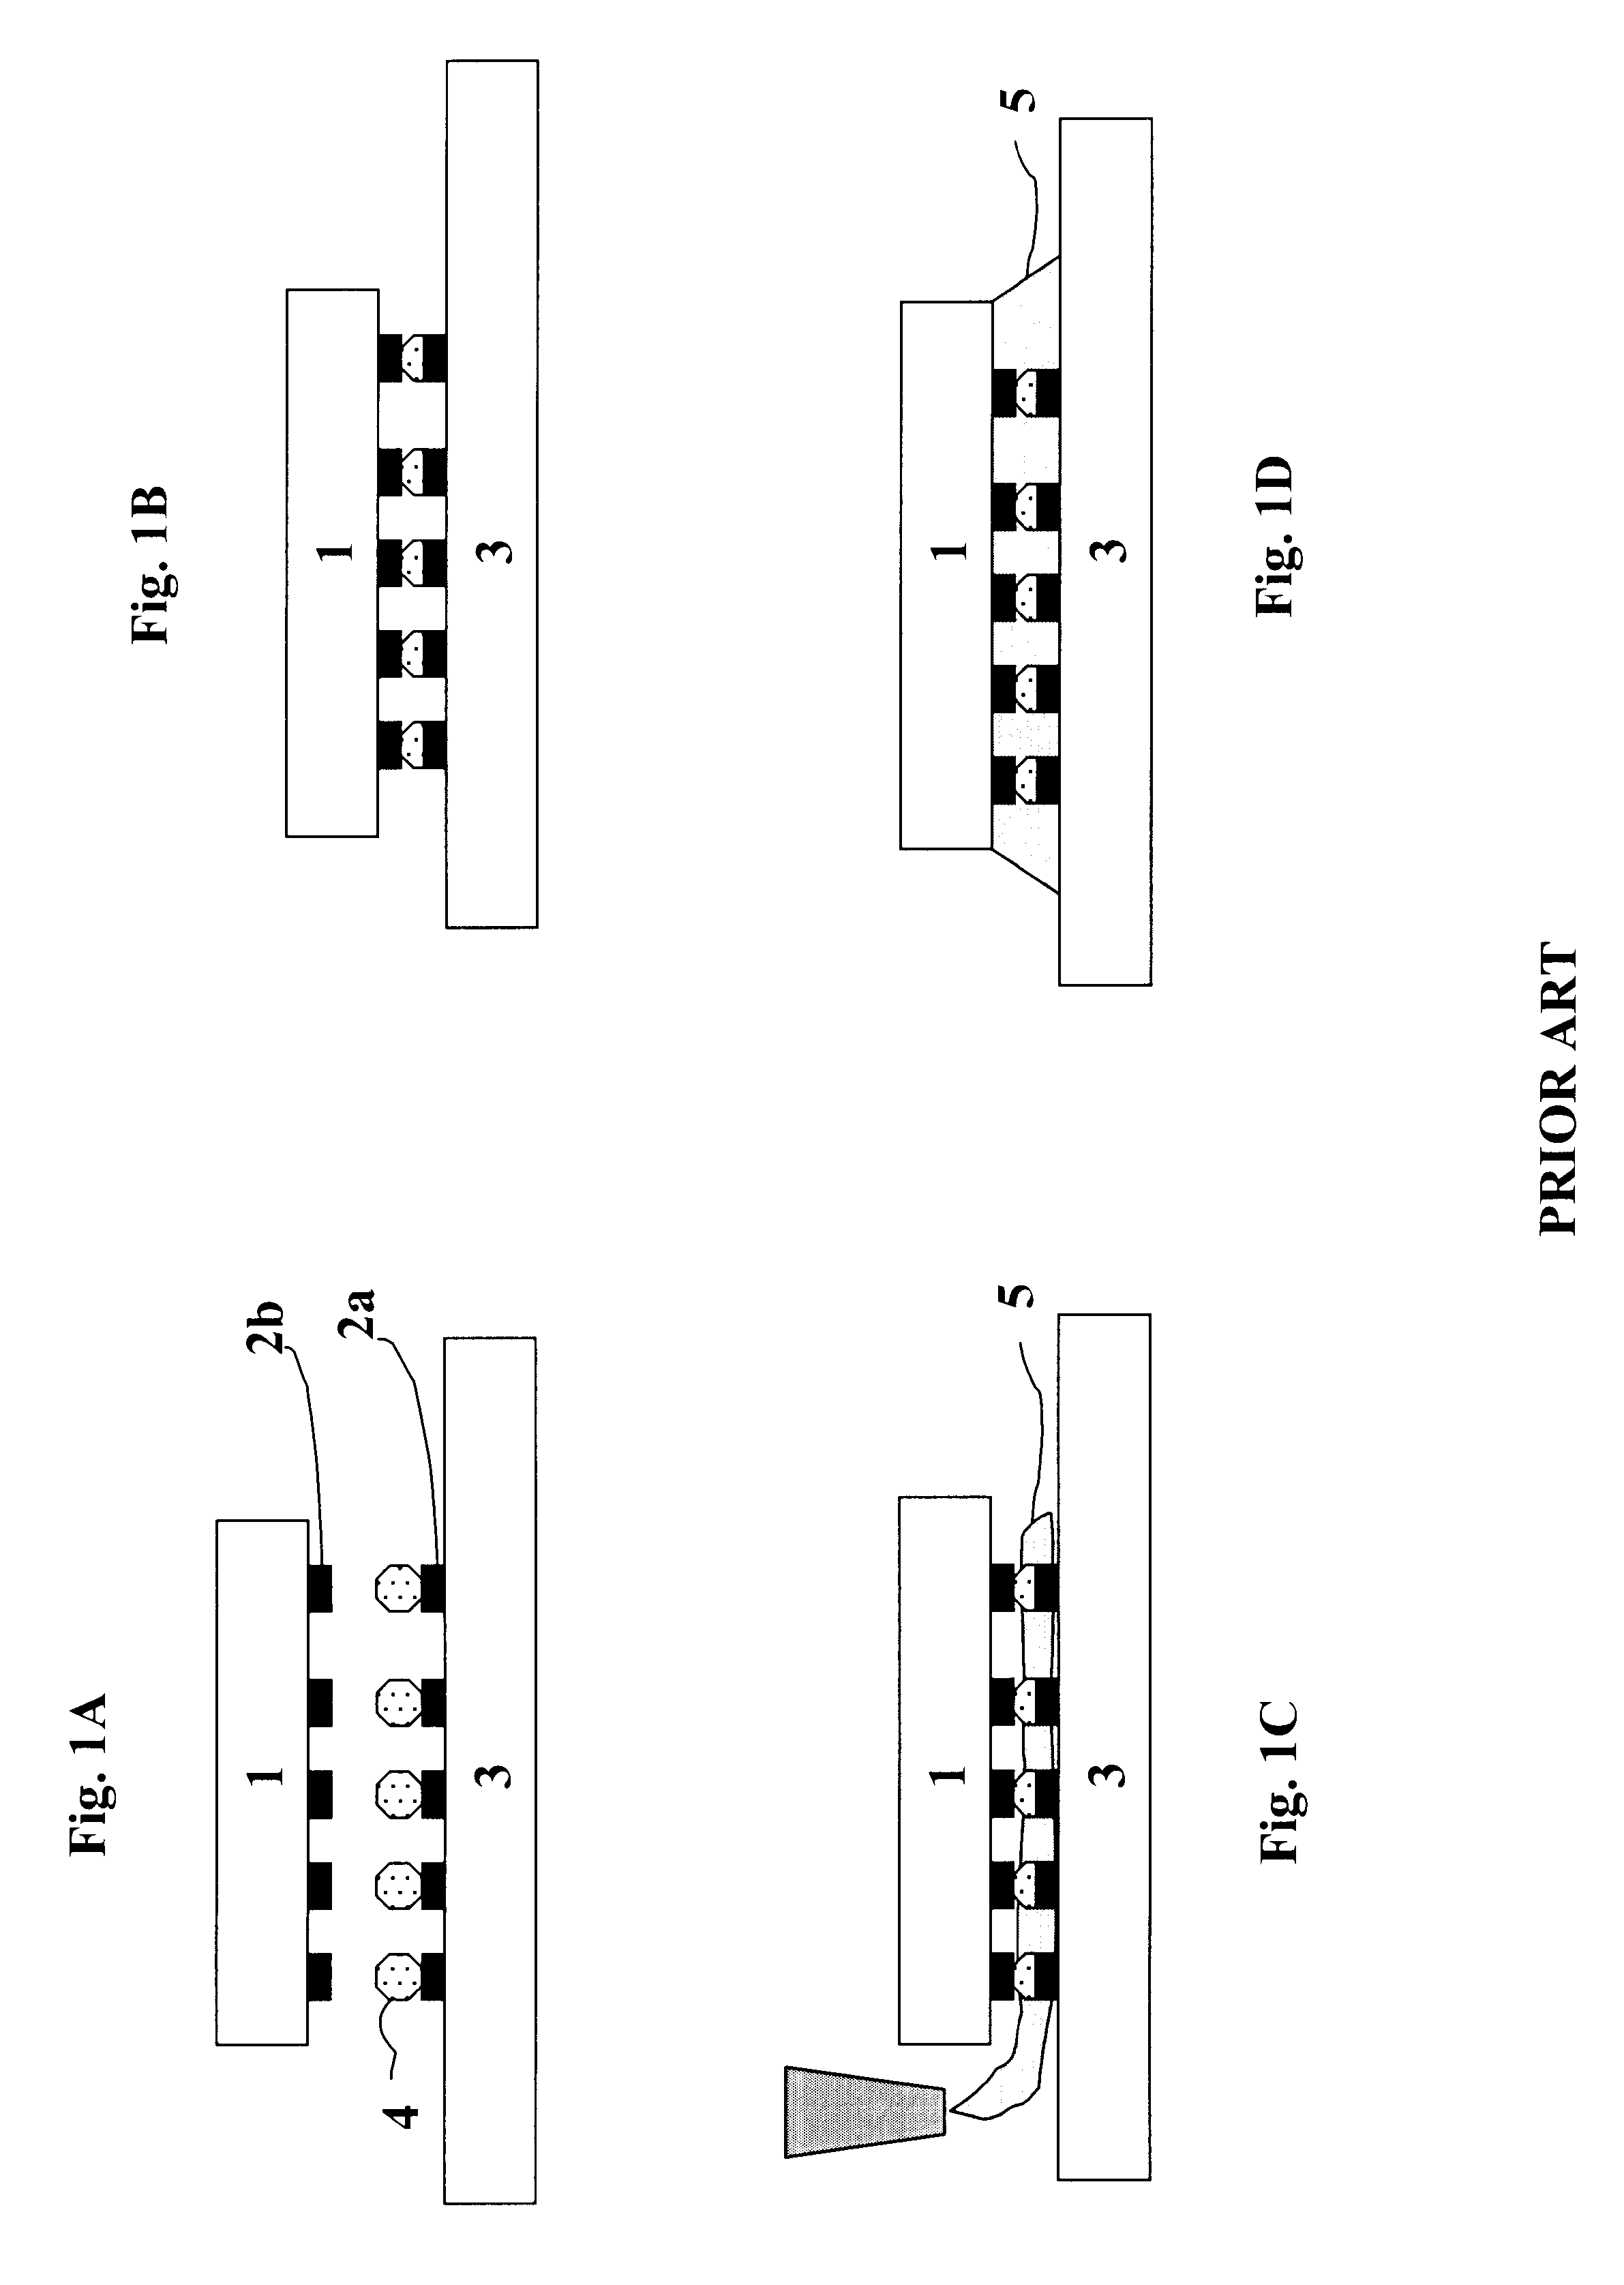 Flip-chip assembly of semiconductor devices using adhesives